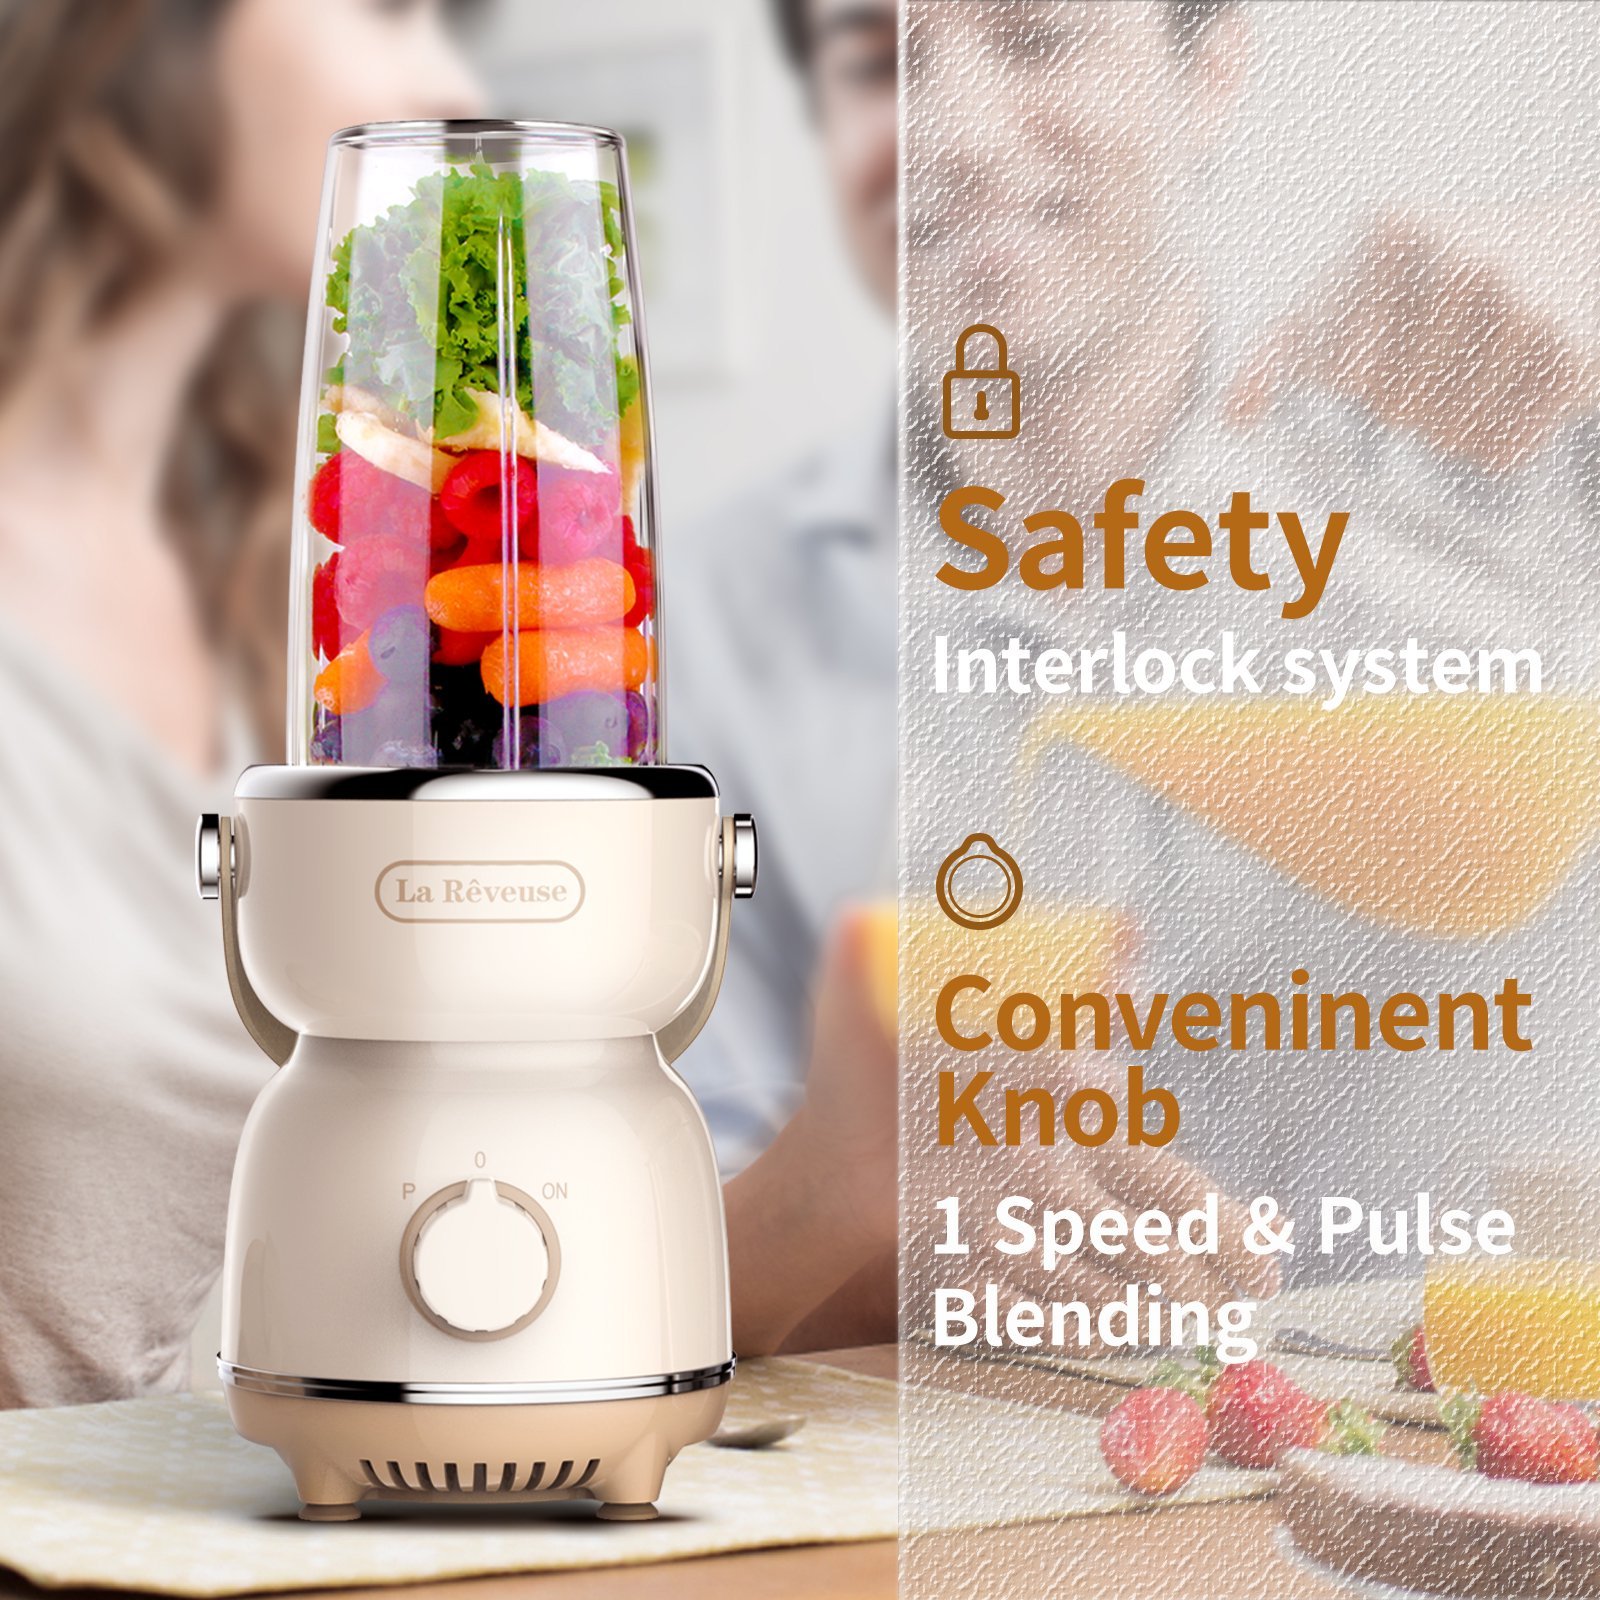 https://themarketdepot.com/wp-content/uploads/2023/01/La-Reveuse-Personal-Size-Bullet-Blender-300-Watts-for-Shakes-Smoothies-Seasonings-Sauces-with-17-oz-Cup-10-oz-MugRetro-Style-7.jpeg